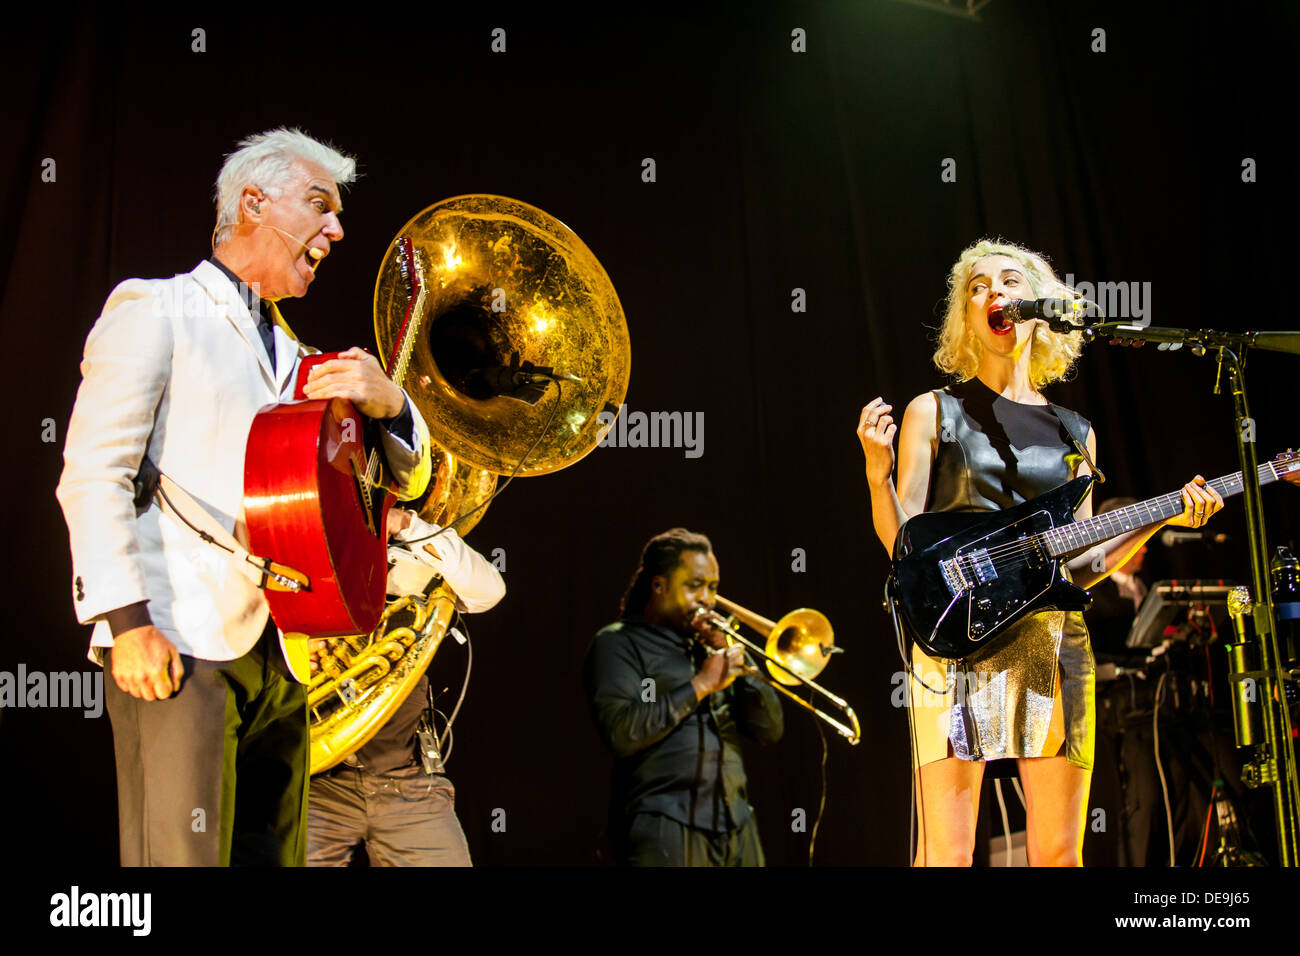 David Byrne from Talking Heads & St Vincent play live at Electric Picnic 2013 Stock Photo